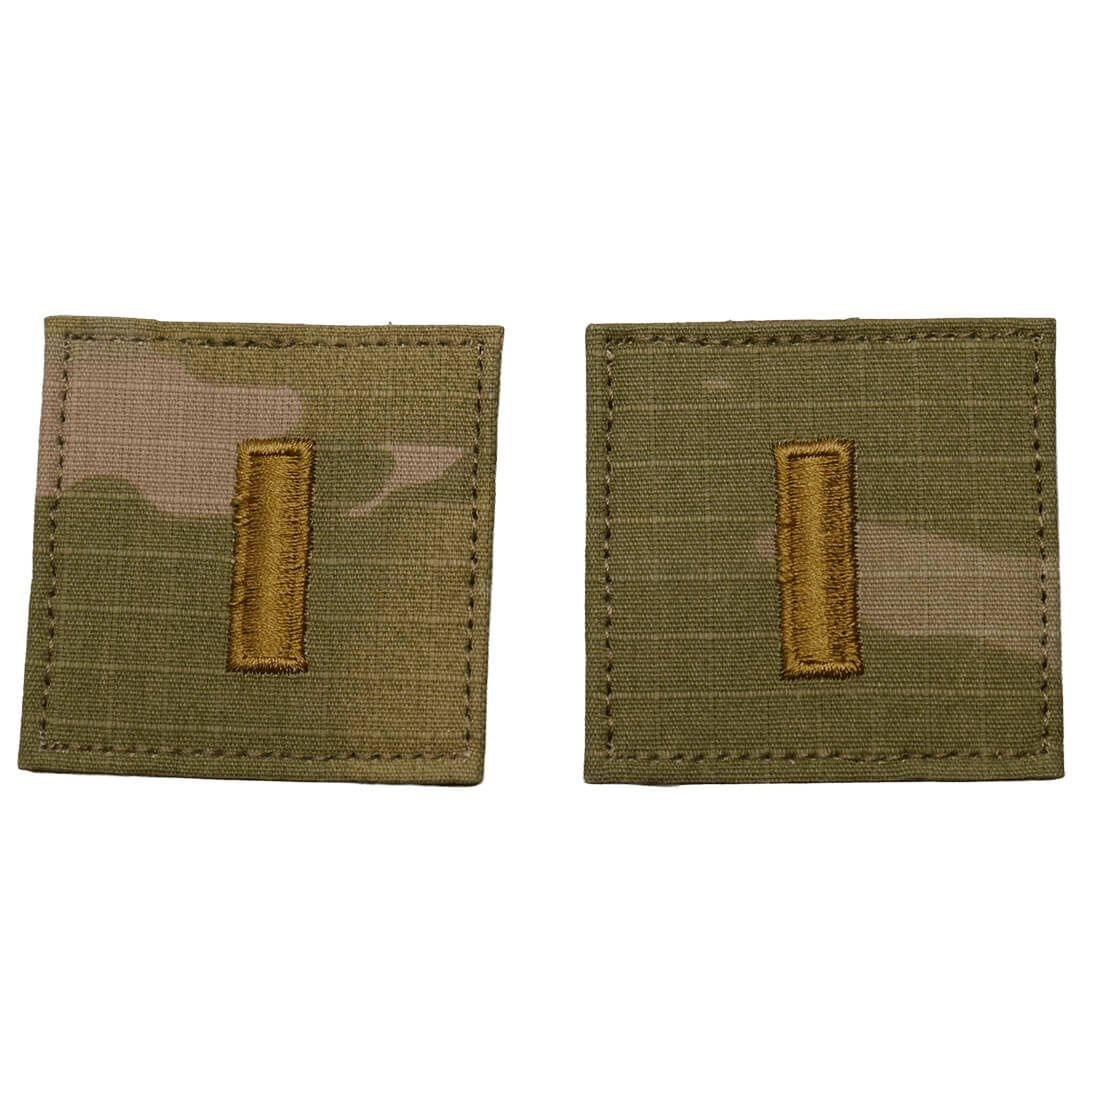 2LT Second Lieutenant Army Rank OCP Patch With Hook Fastener - Pair